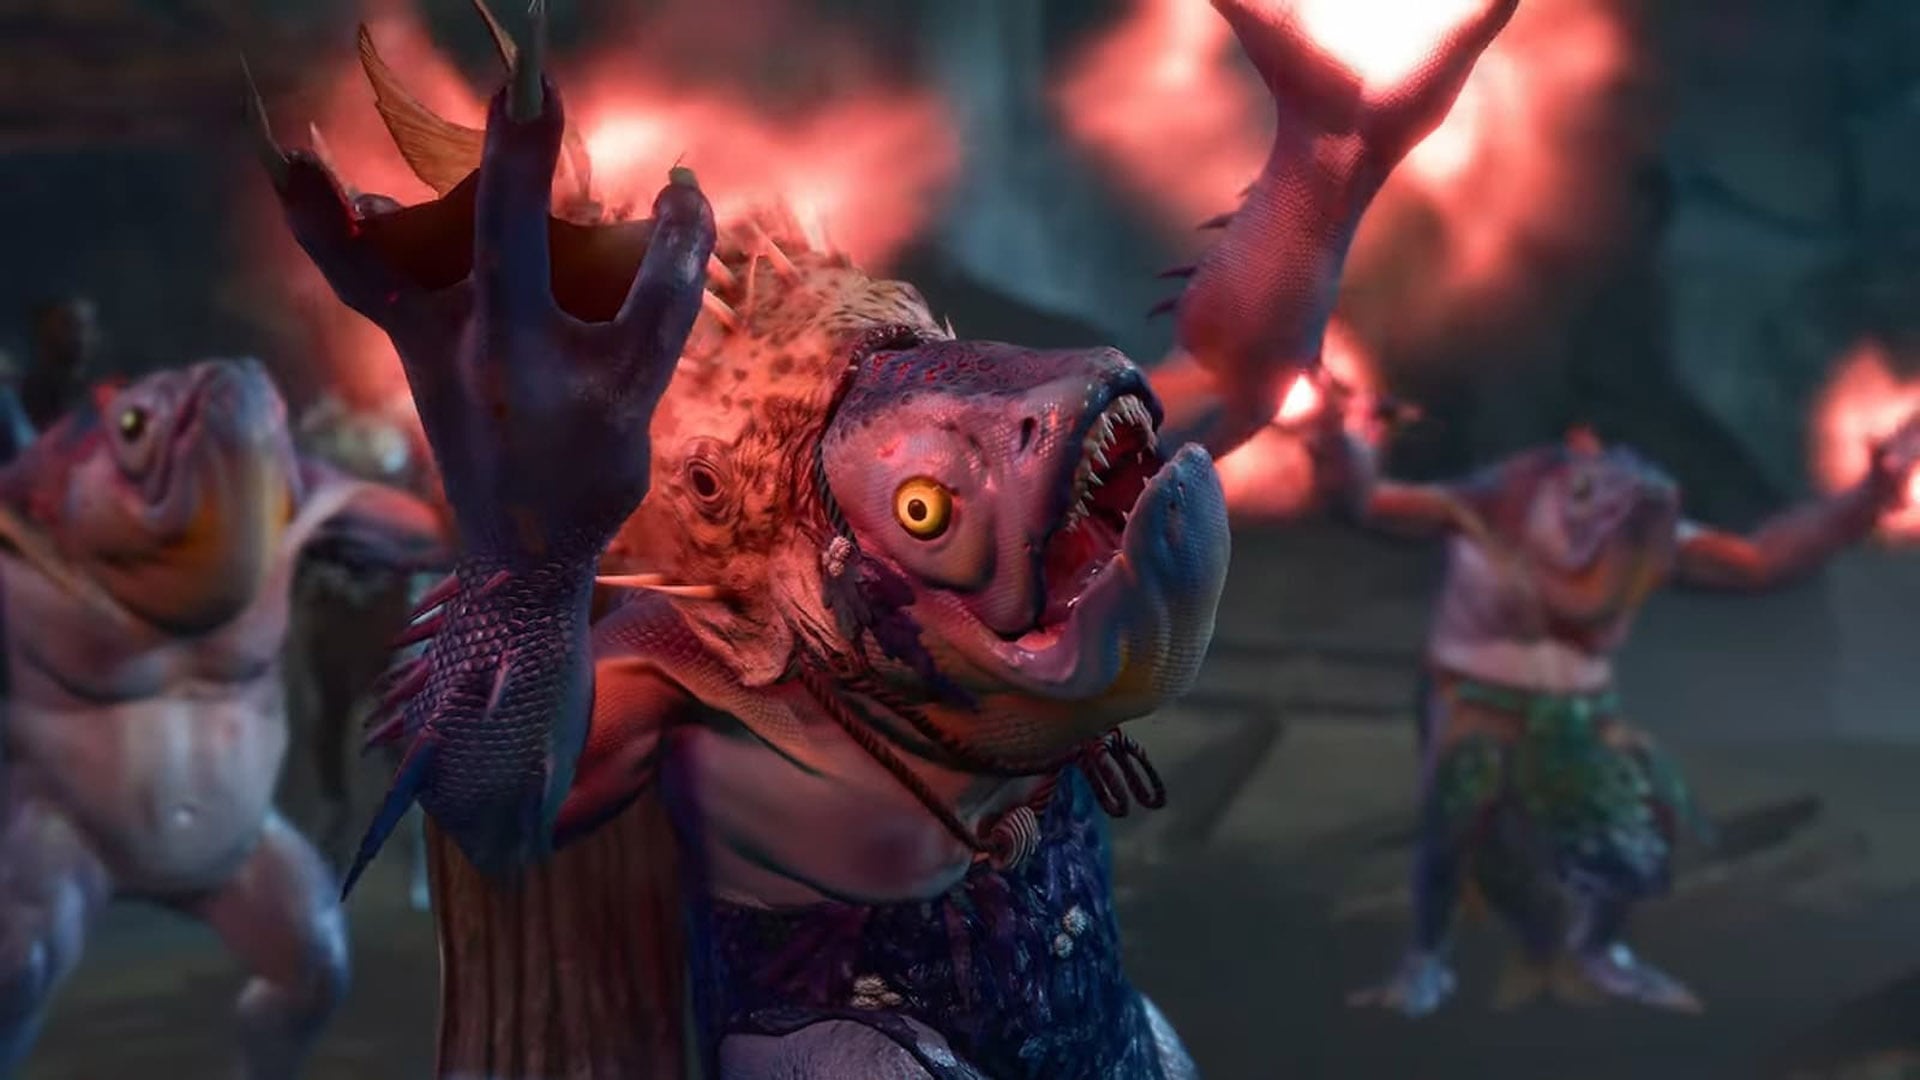 Dynamic depiction of magic use and mythical creatures in Baldur's Gate 3, highlighting the game's rich fantasy elements